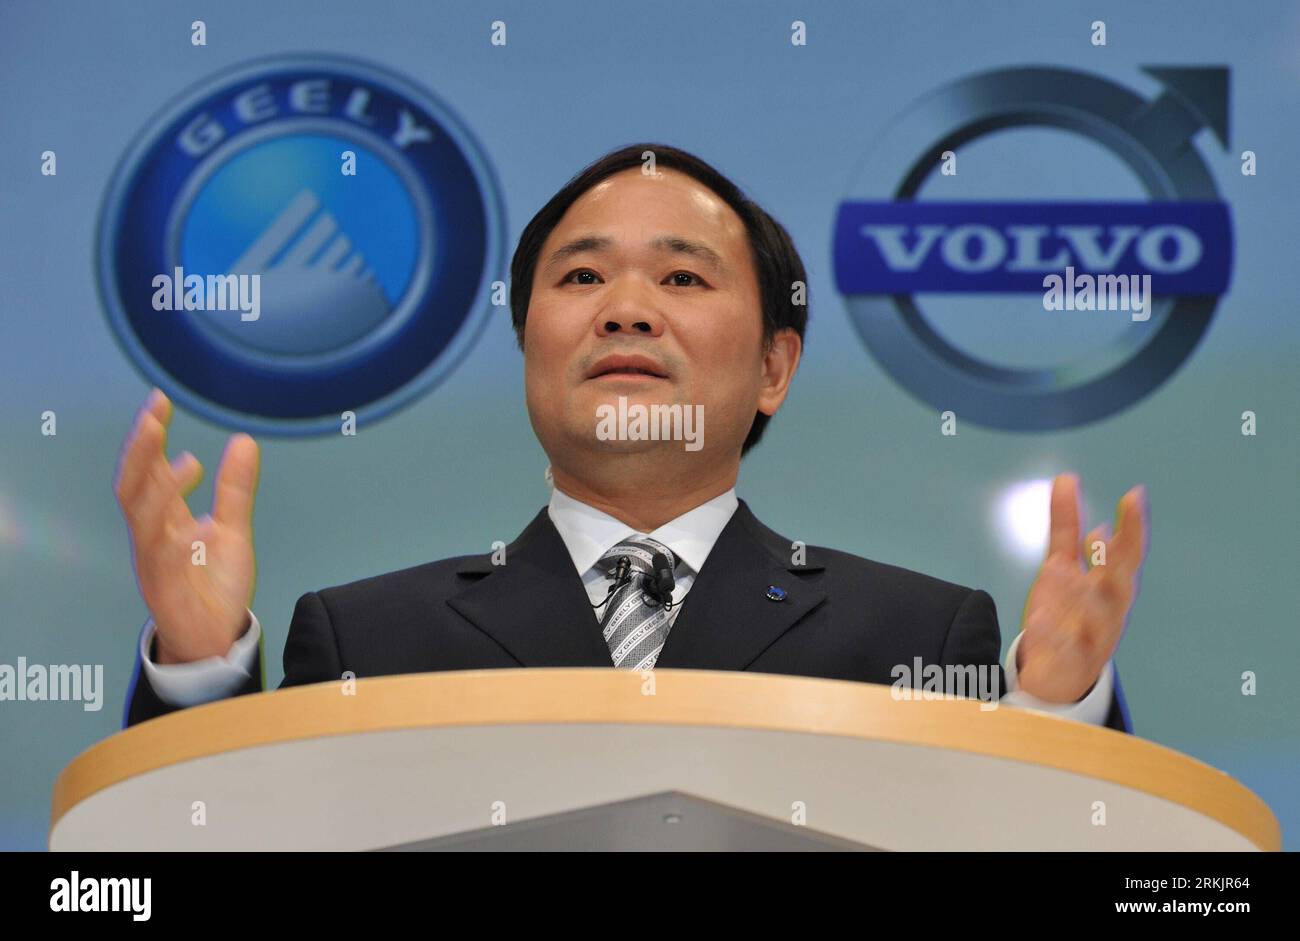 (111008) -- BEIJING, Oct. 8, 2011 (Xinhua) -- Geely President Li Shufu addresses a press conference after the signing of a deal with Ford Motor Co. on Geely s purchase of Sweden s Volvo Cars in Goteborg of Sweden, on March 28, 2010. The Volvo Car Corp. was acquired by China s Geely Group in 2010, marking the first time a Chinese car maker acquired an international brand car company. At present, Asia is playing a significant role in the word which no one can ignore. The emerging economies like China and India, have been the most active growth pole of global economy. Financial Times has said, th Stock Photo